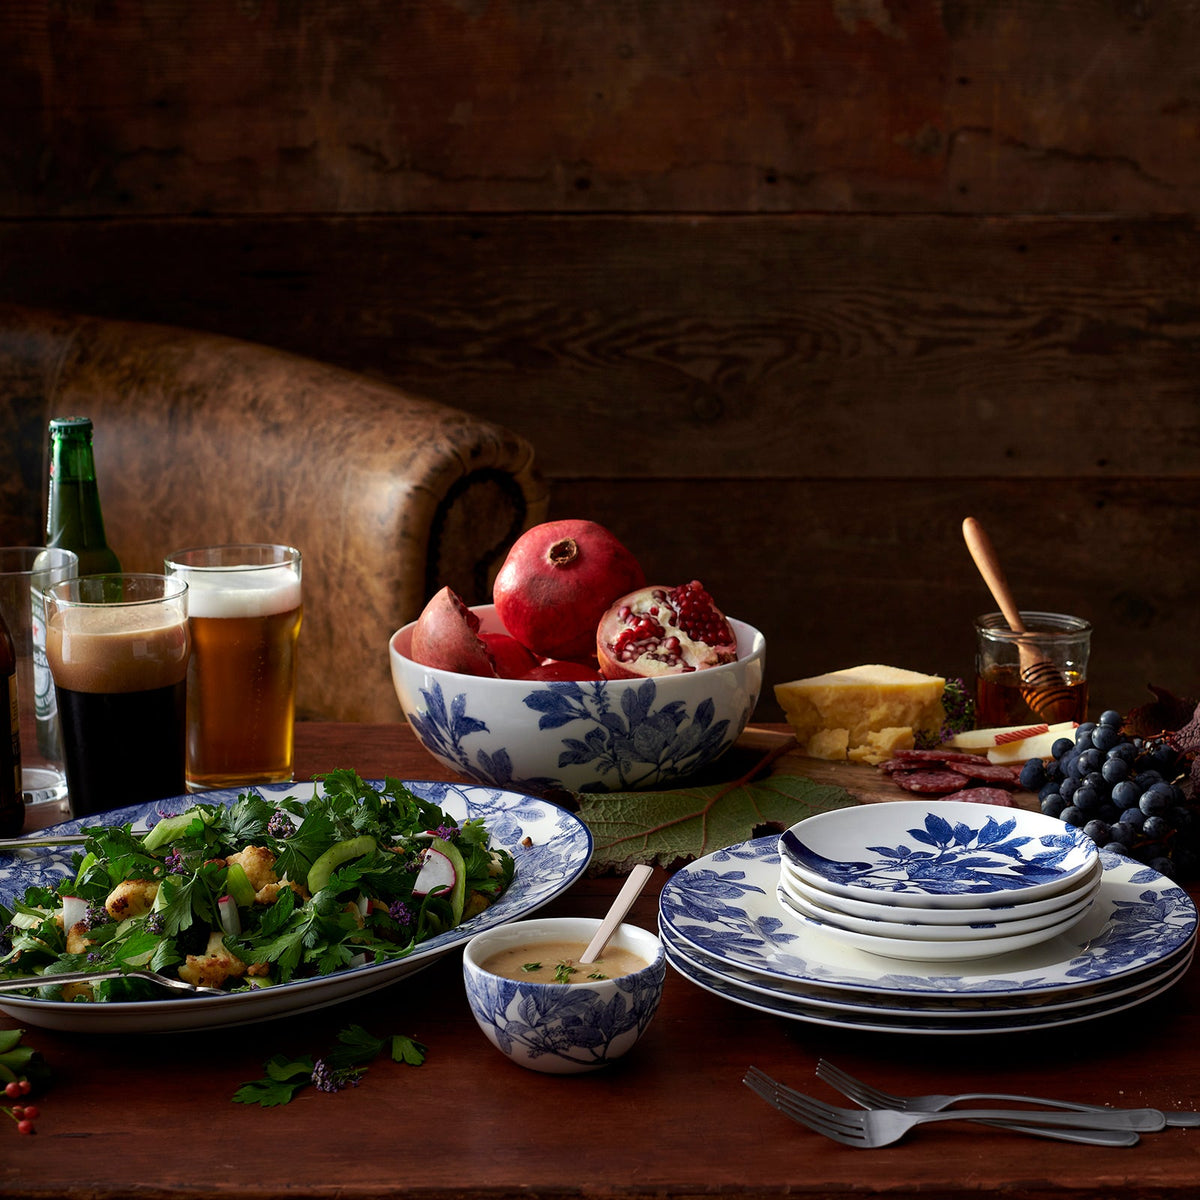 A rustic wooden table set with blue-and-white dishes, a salad, drinks, cheese, a pomegranate, grapes, and utensils is elevated to high style with the addition of the Arbor Oval Rimmed Platter by Caskata Artisanal Home.